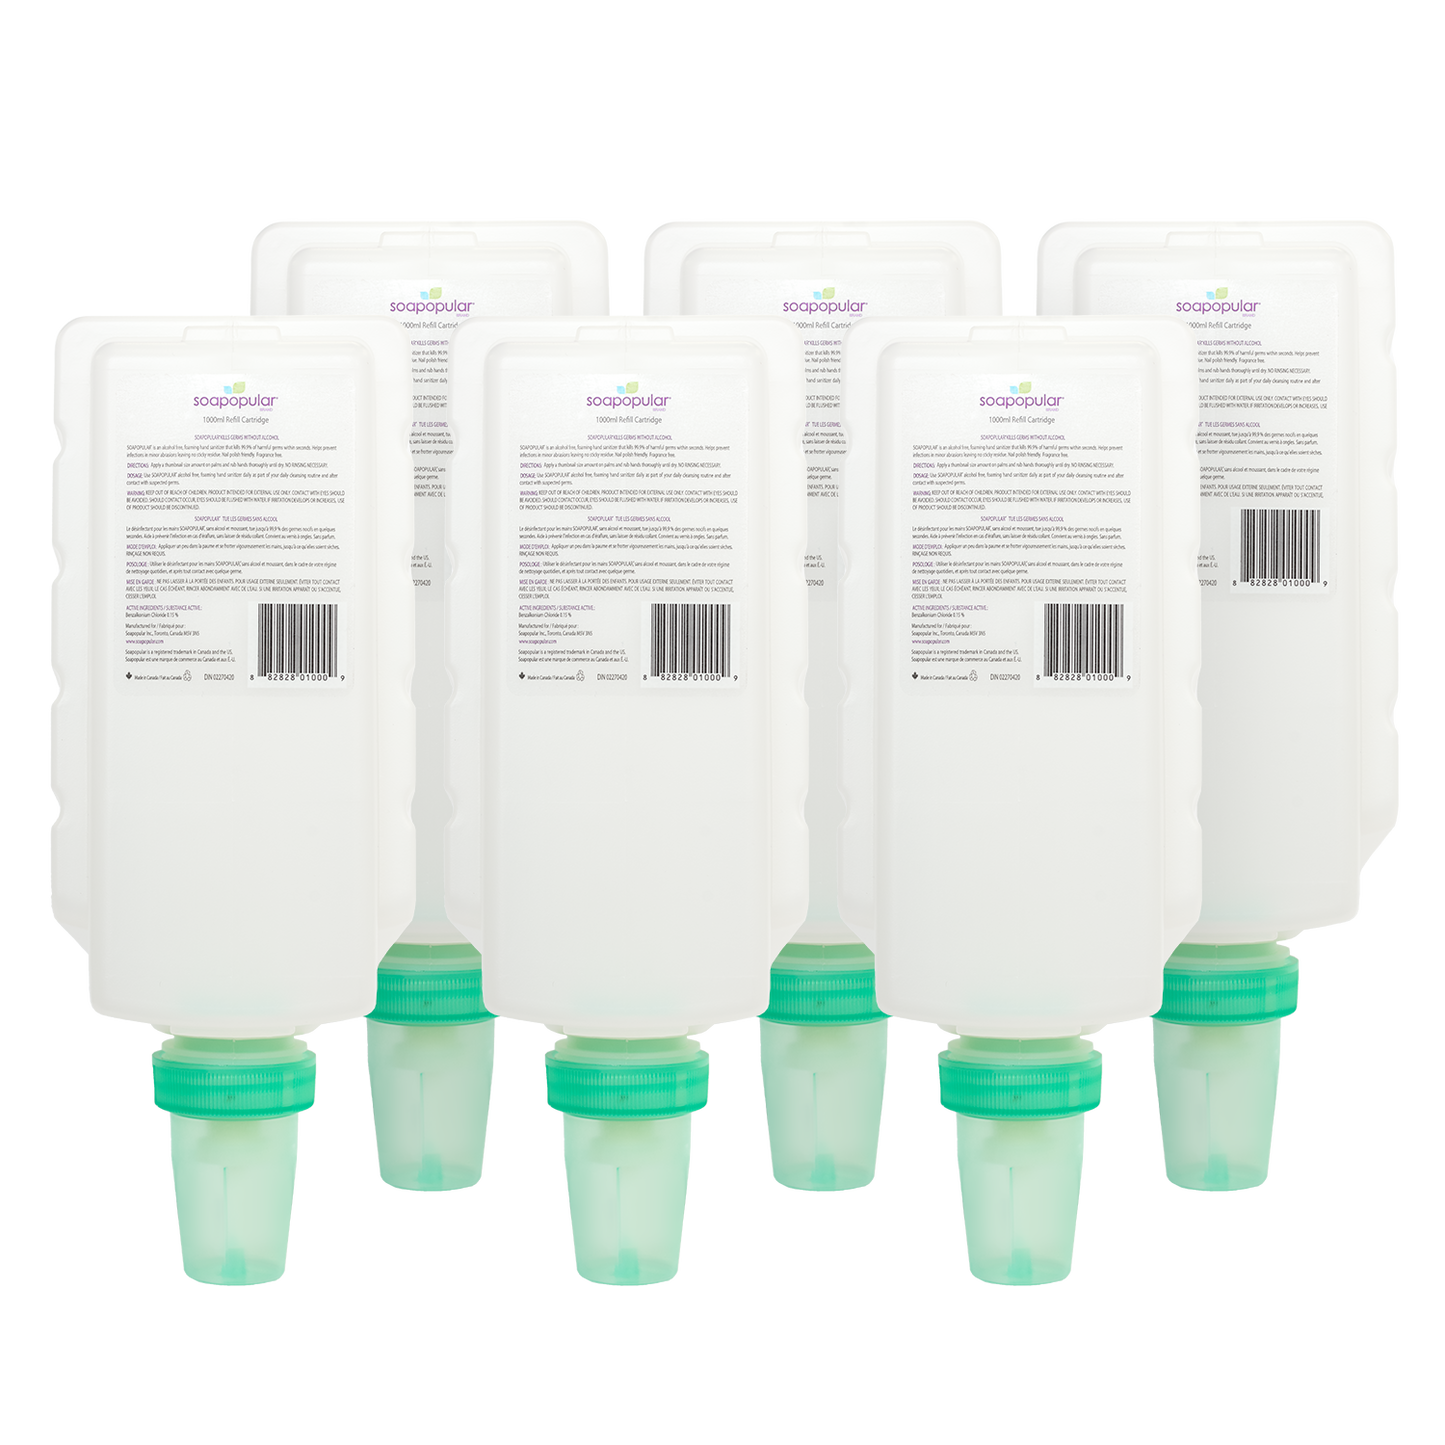 PROMOTION* Soapopular DIN Alcohol Free Foam Hand Sanitizer - 1 L Cartridge Refill (6PK)  &  Receive 1 FREE  Wall Dispenser - No Cover